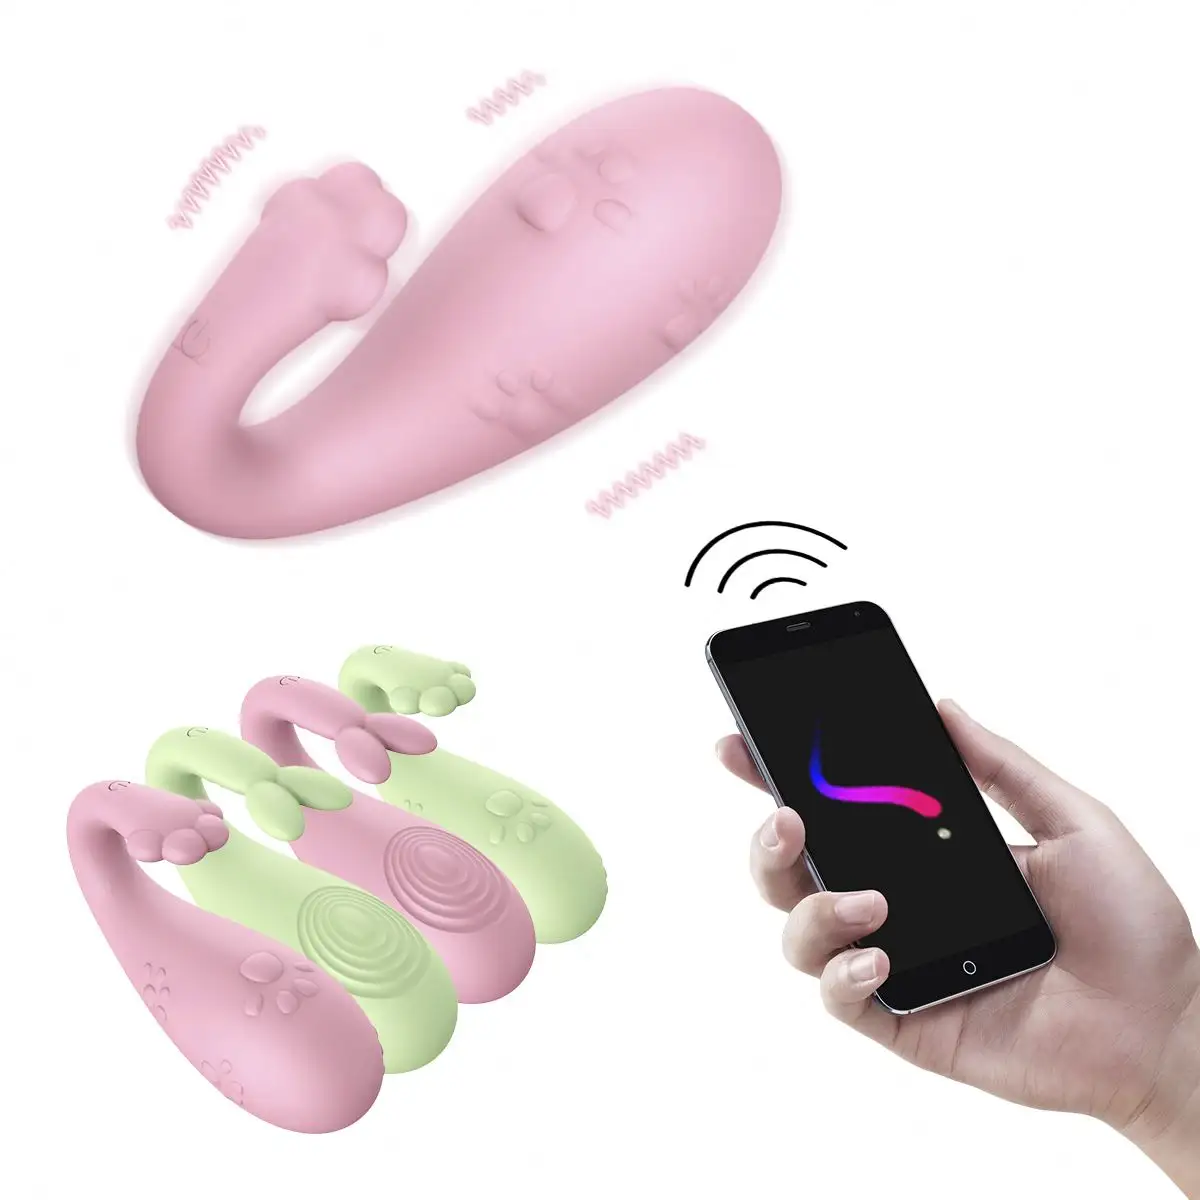 Source New Style Silicone Wireless Remote App/Phone Controlled Vaginal Vibrator Intelligent Women Girl Sex Toys Vibrating on m.alibaba photo